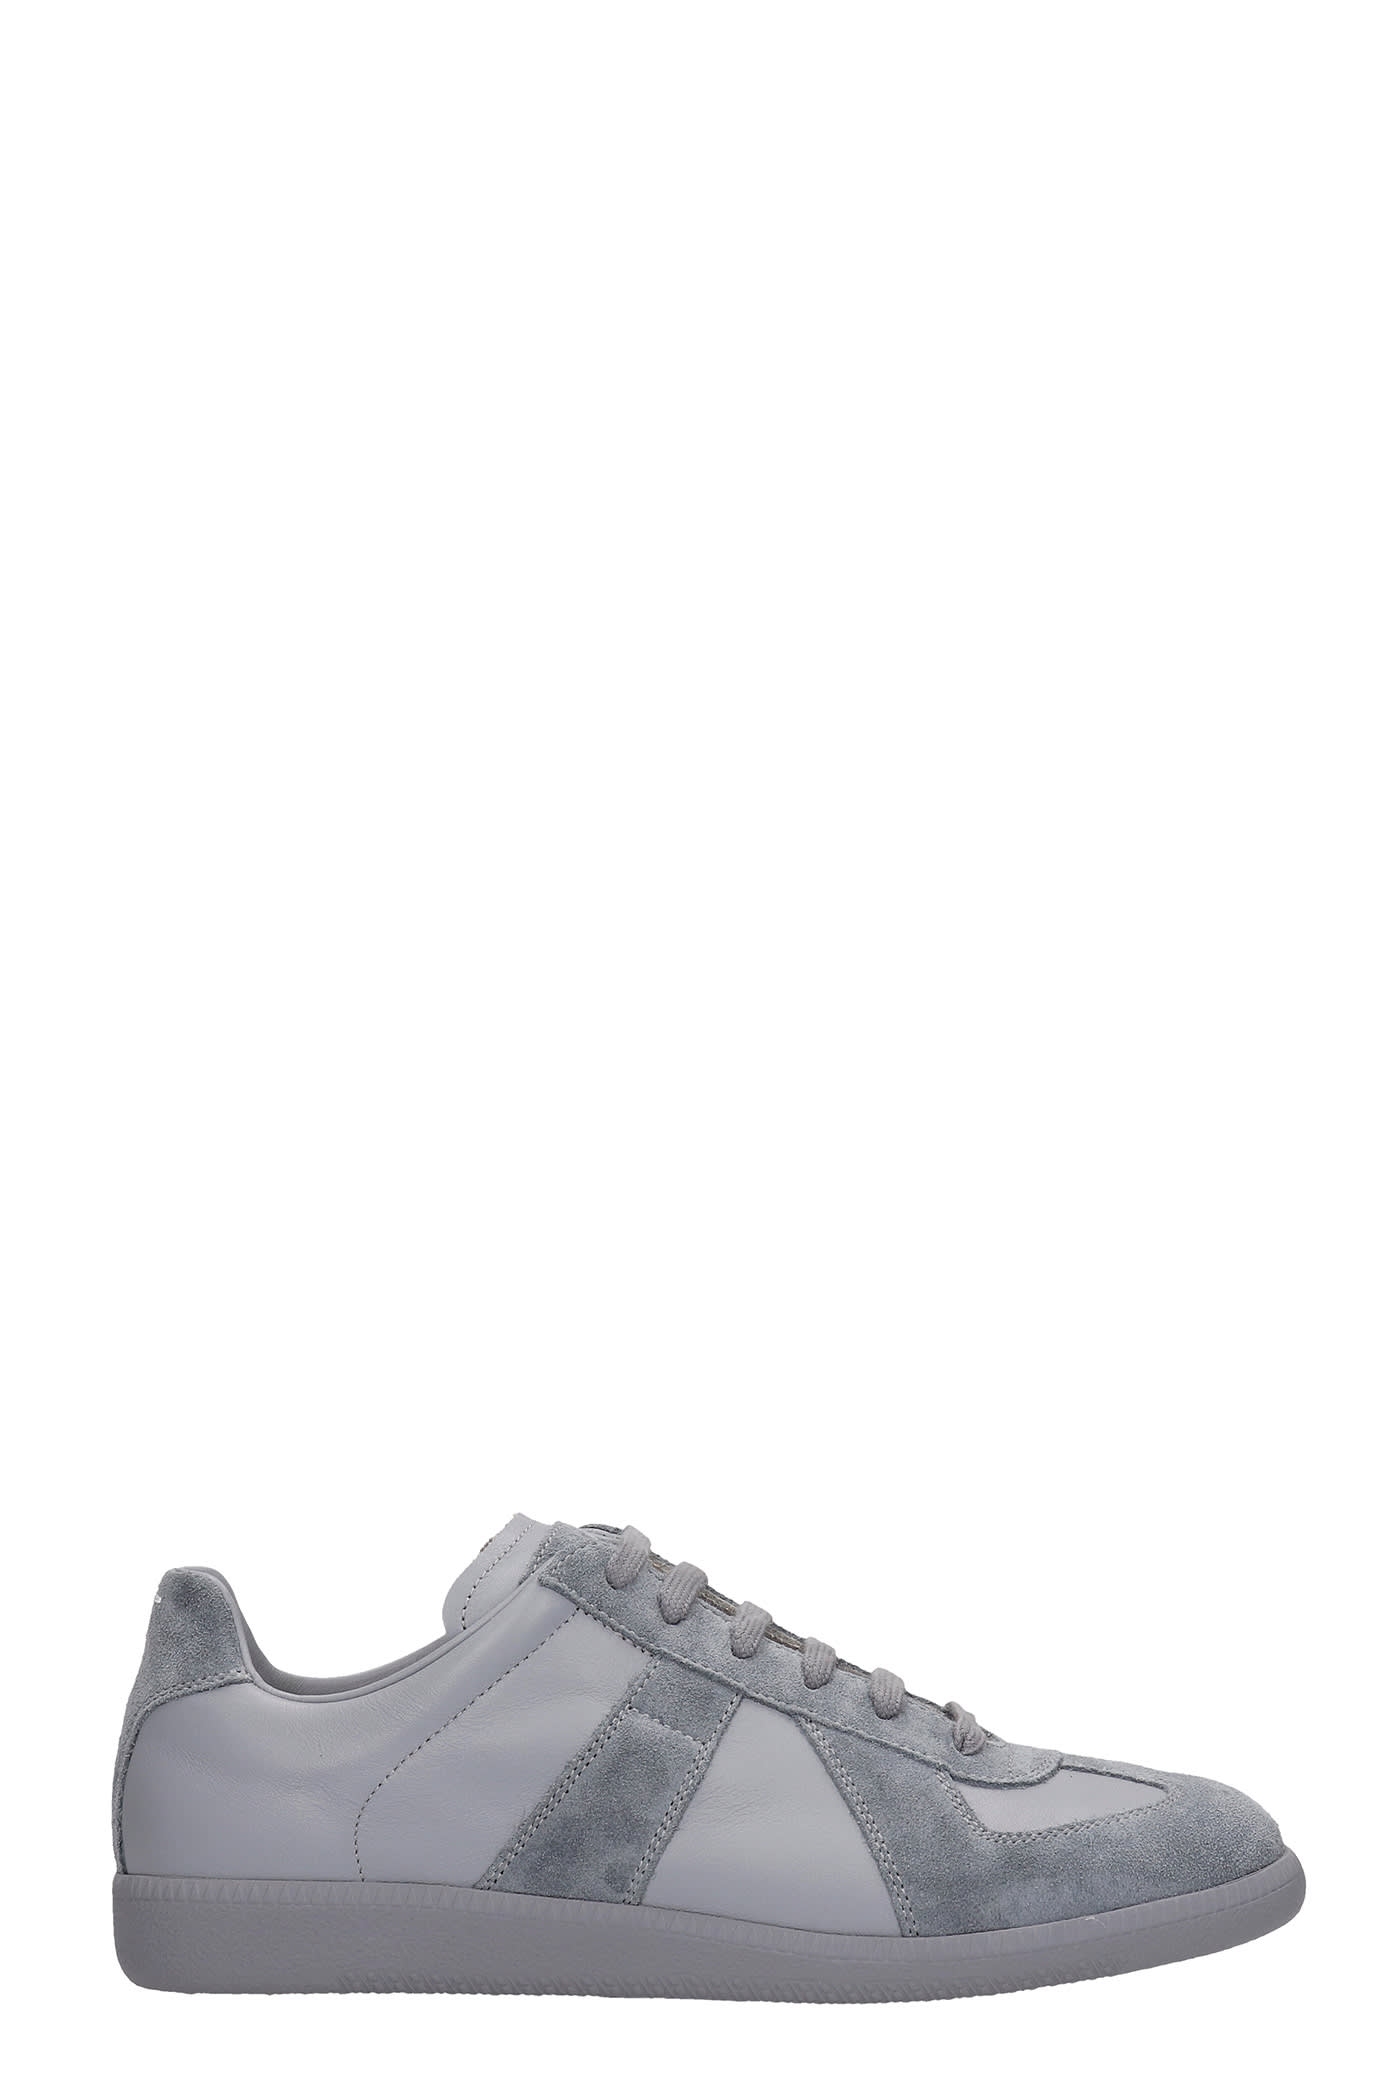 Maison Margiela Replica Sneakers In Grey Suede And Leather